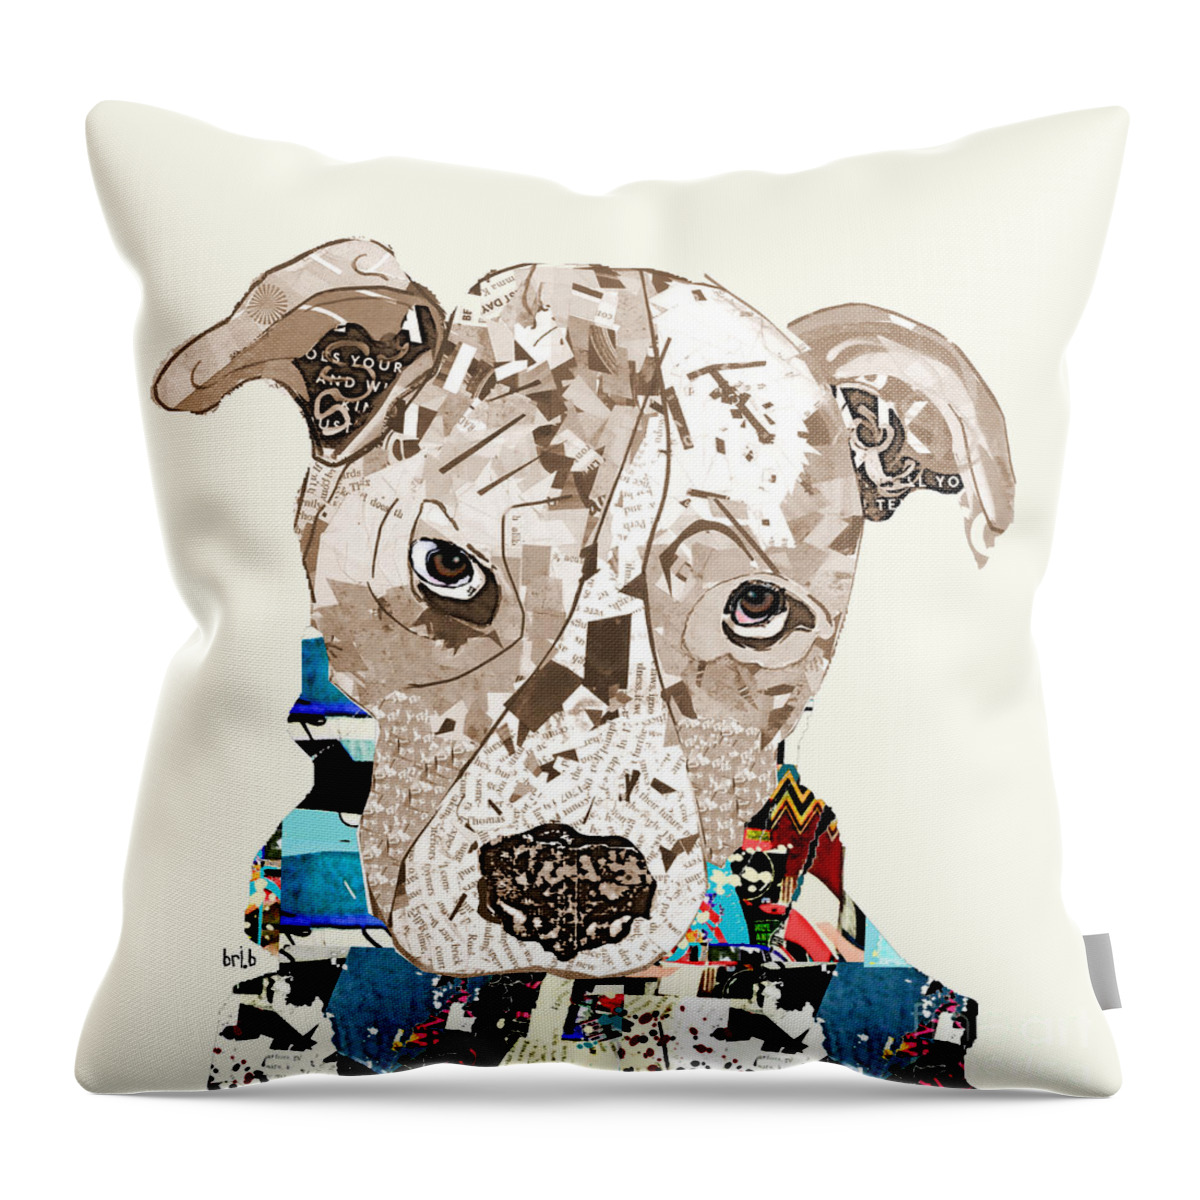 Pitbulls Throw Pillow featuring the painting A Pit Bull Day by Bri Buckley